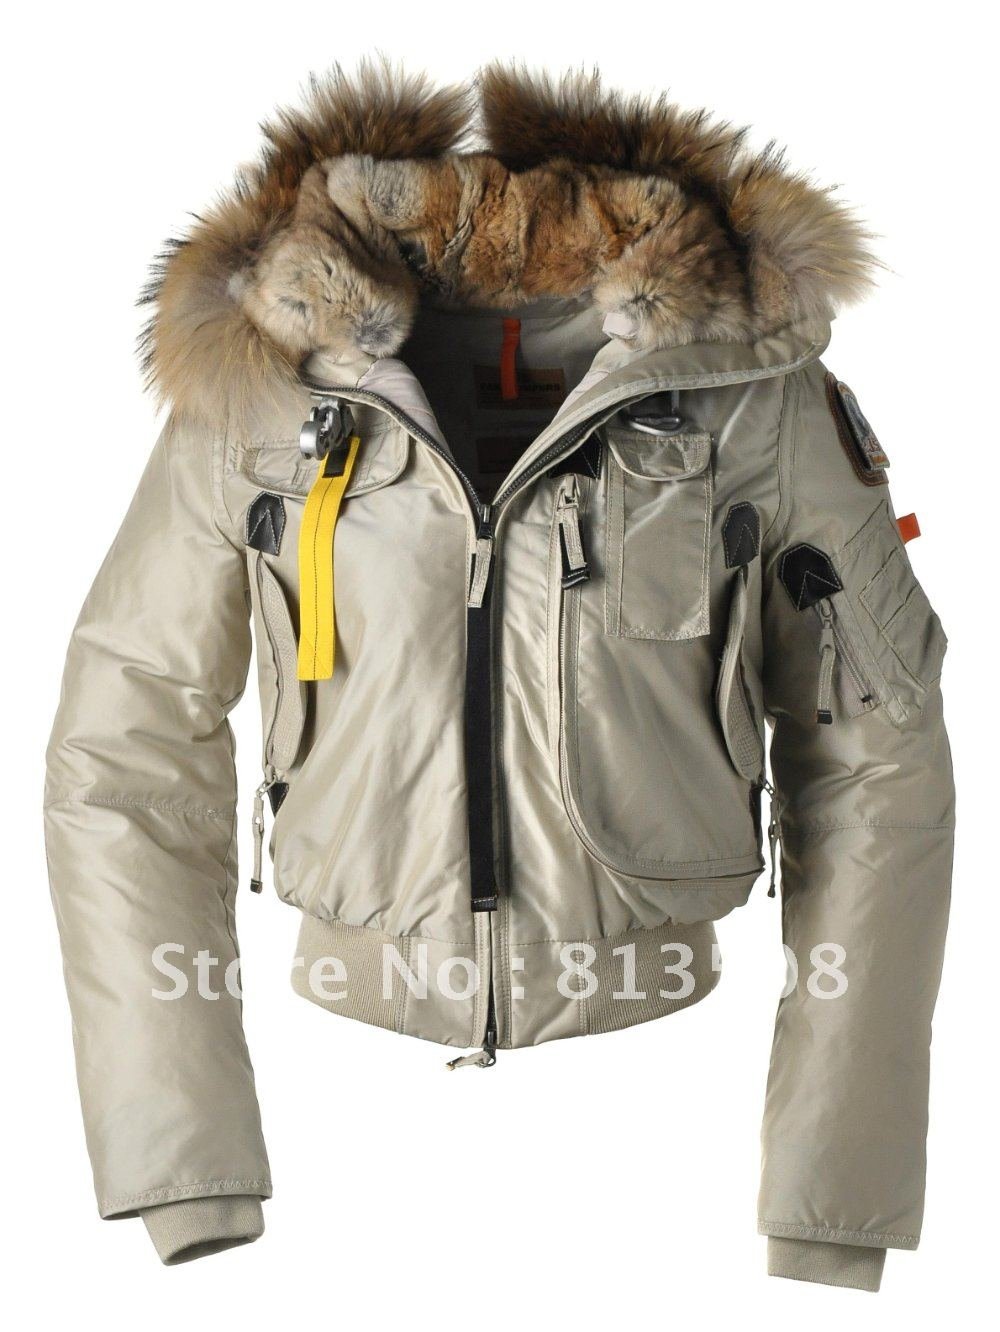 parajumpers norge